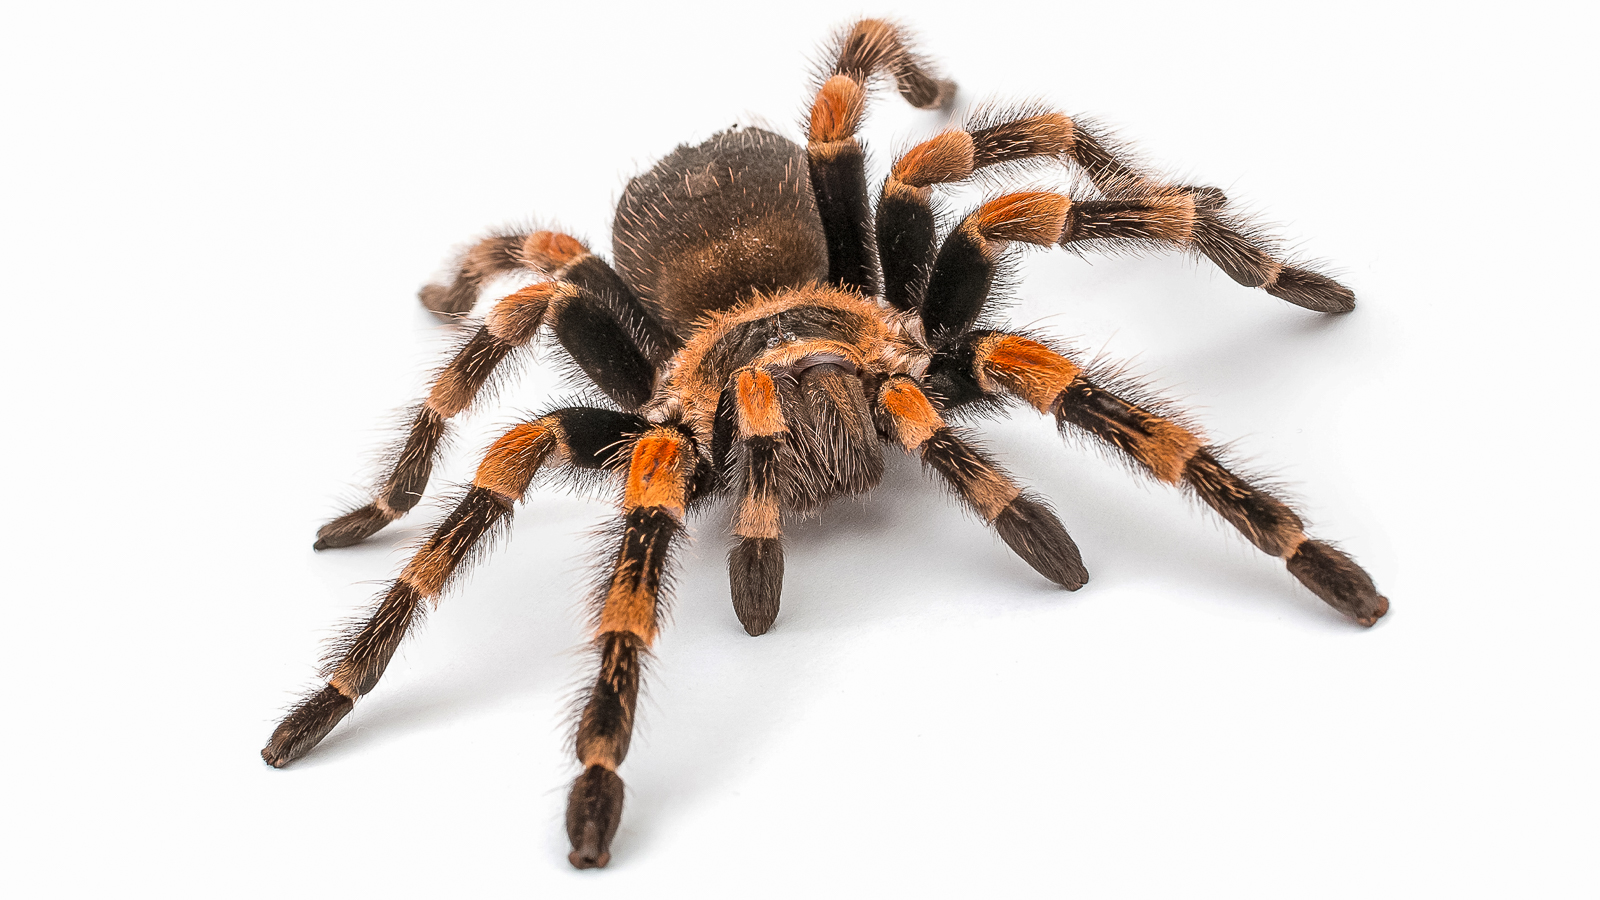 Both human and tarantula muscles contain myosin, which triggers muscle movement. Studying tarantula muscles at the APS can help scientists understand human muscle movement. (Image by Pets in Frames / Shutterstock.)